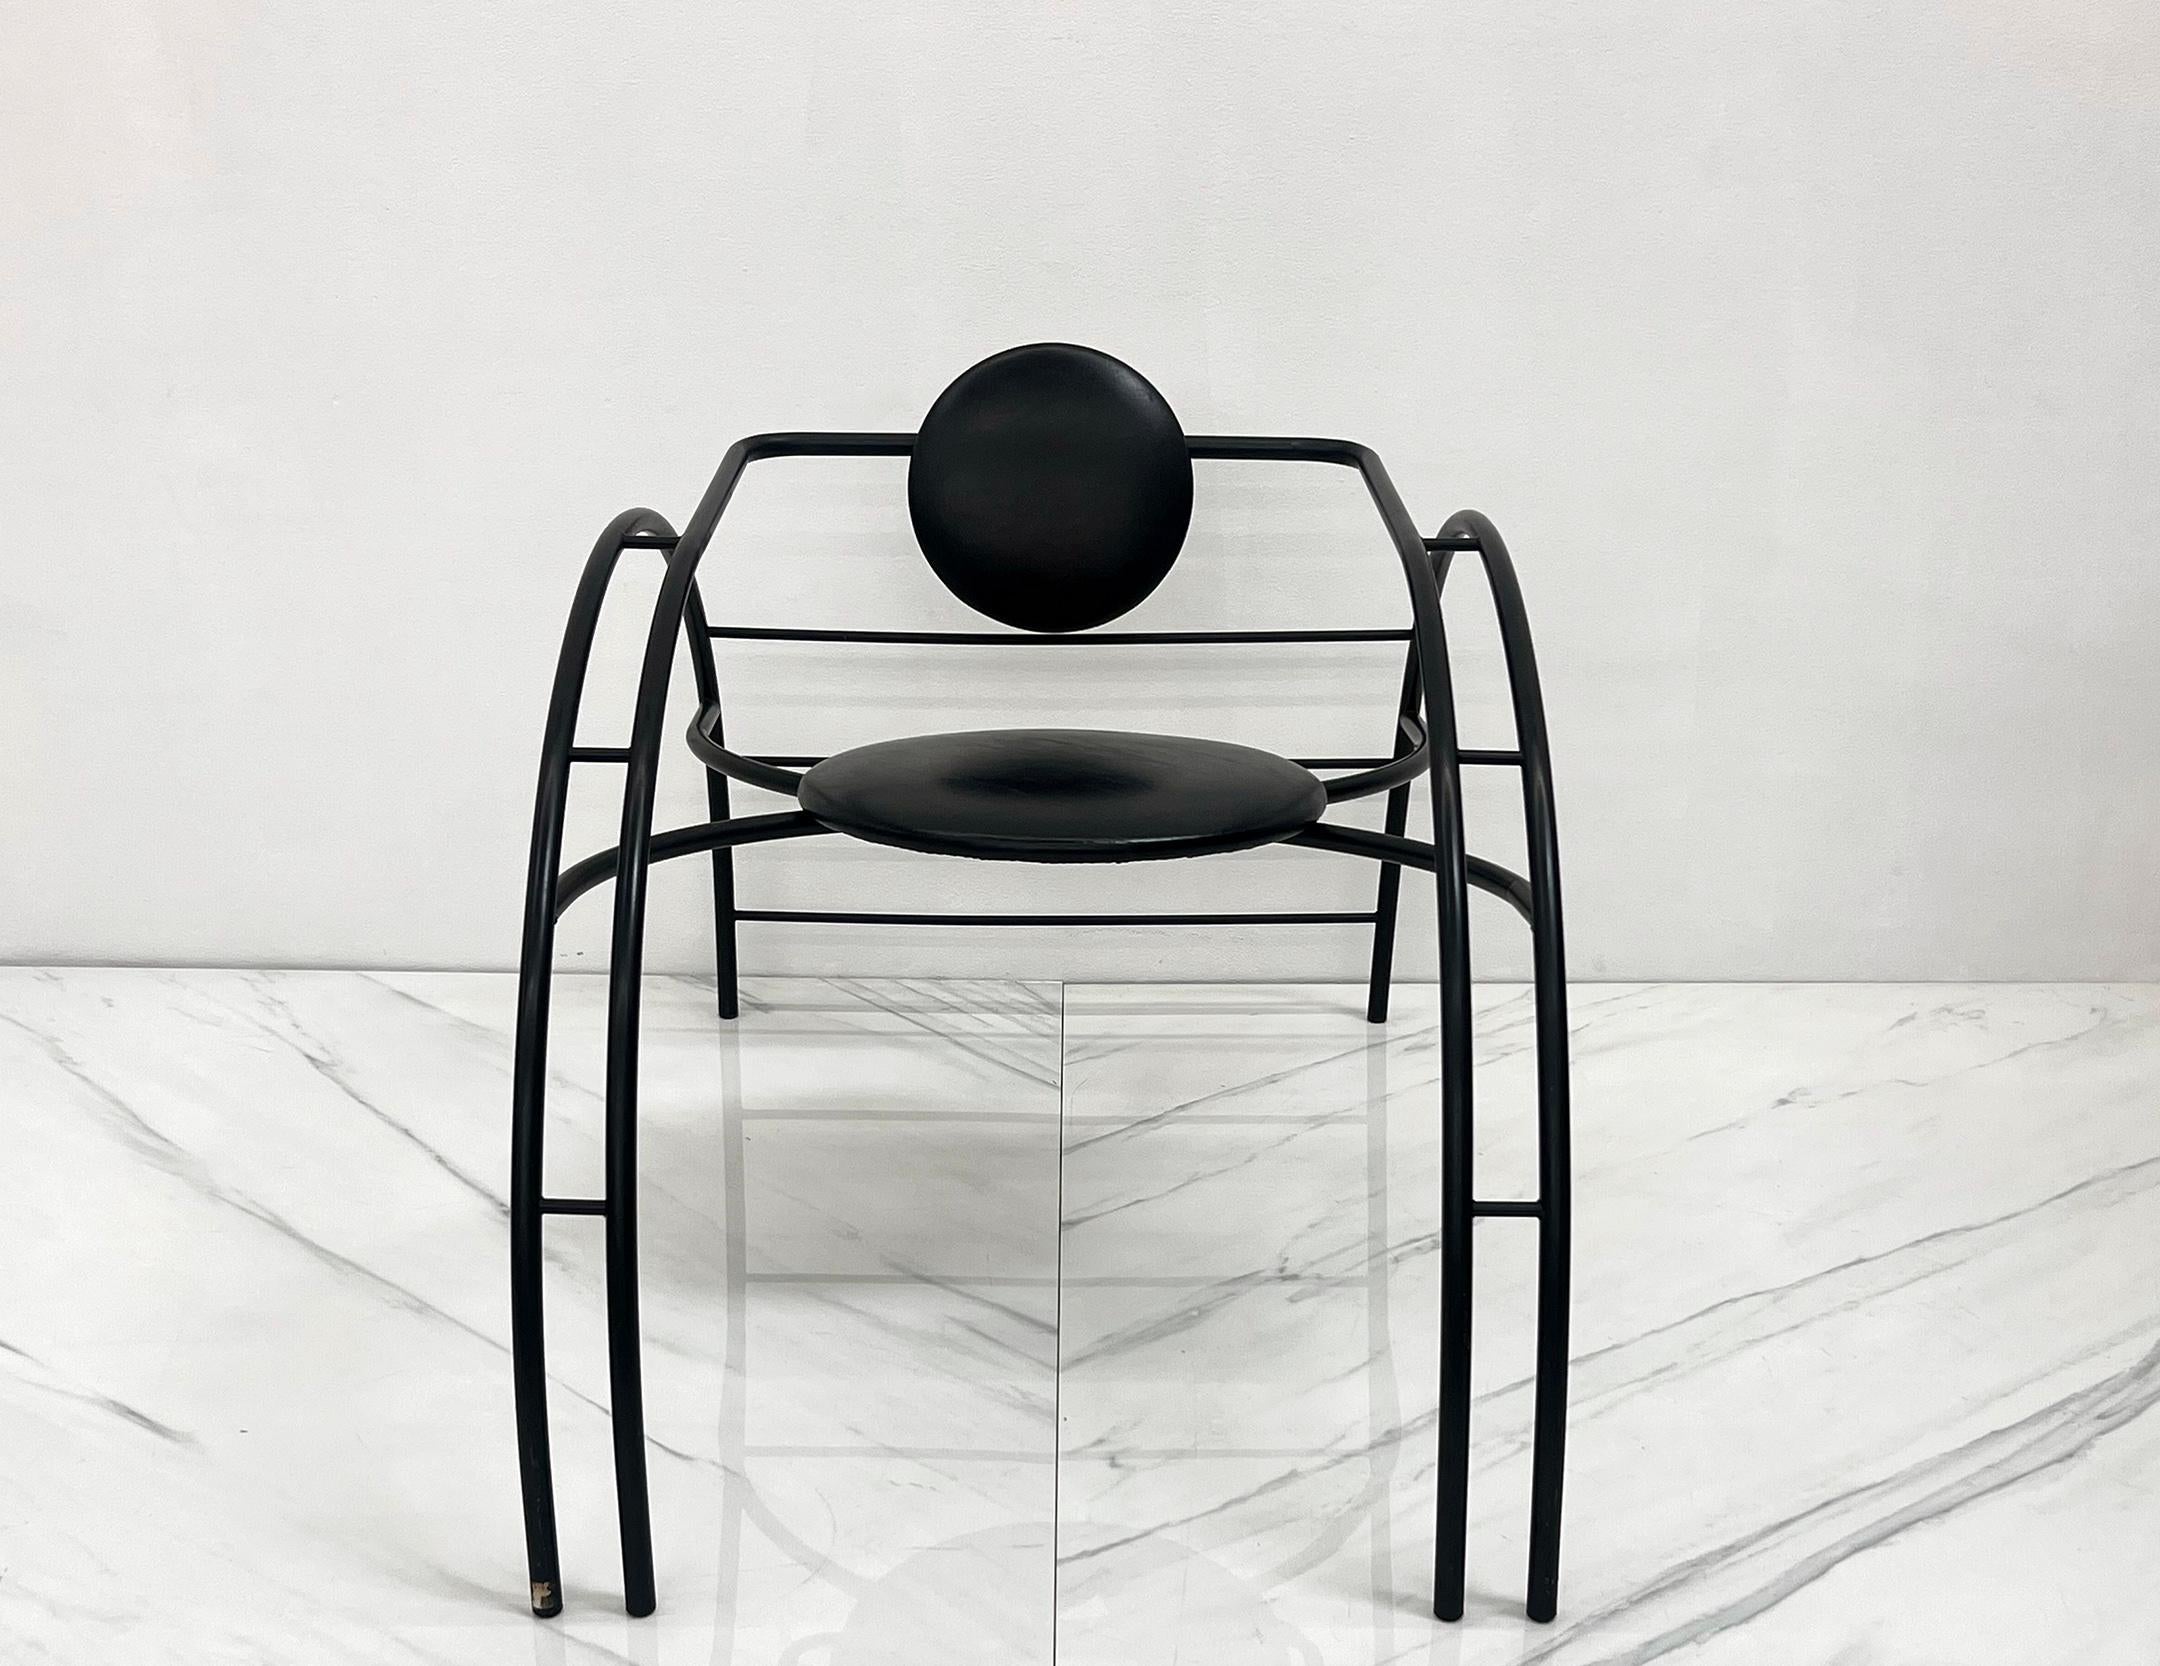 Steel Postmodern Les Amisca Quebec 69 Spider Chair For Sale